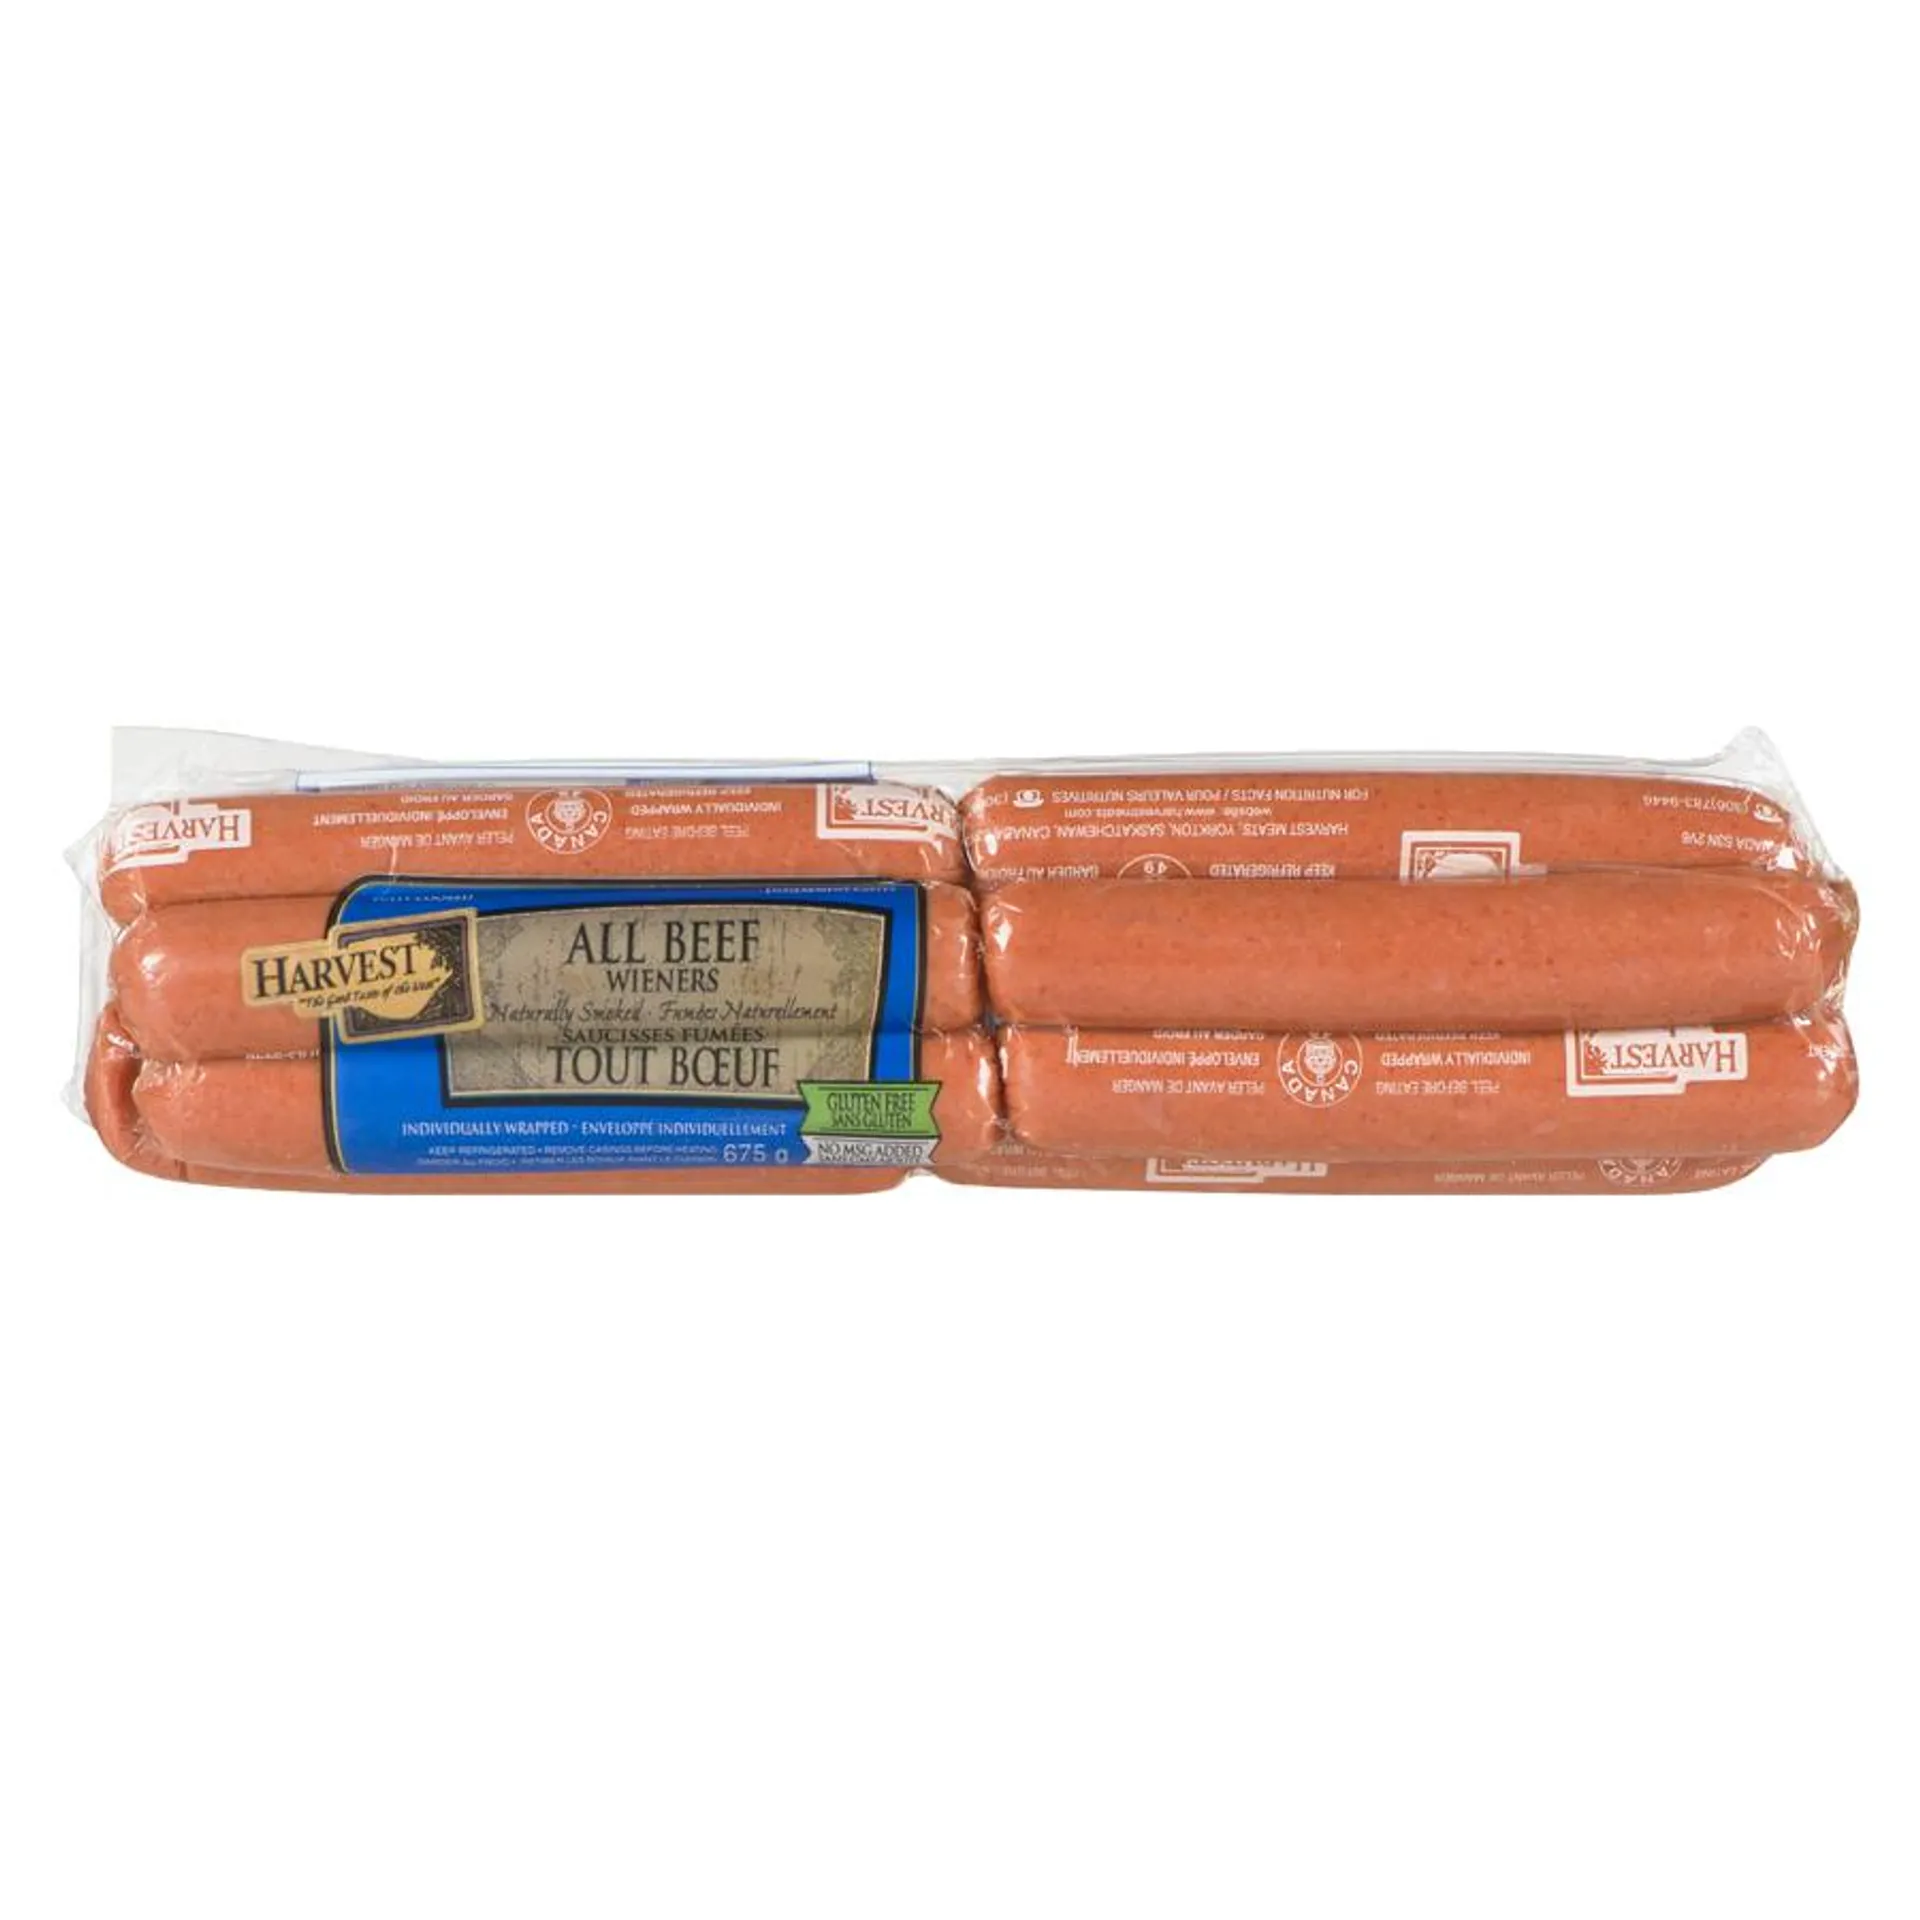 Naturally Smoked Wieners, All Beef